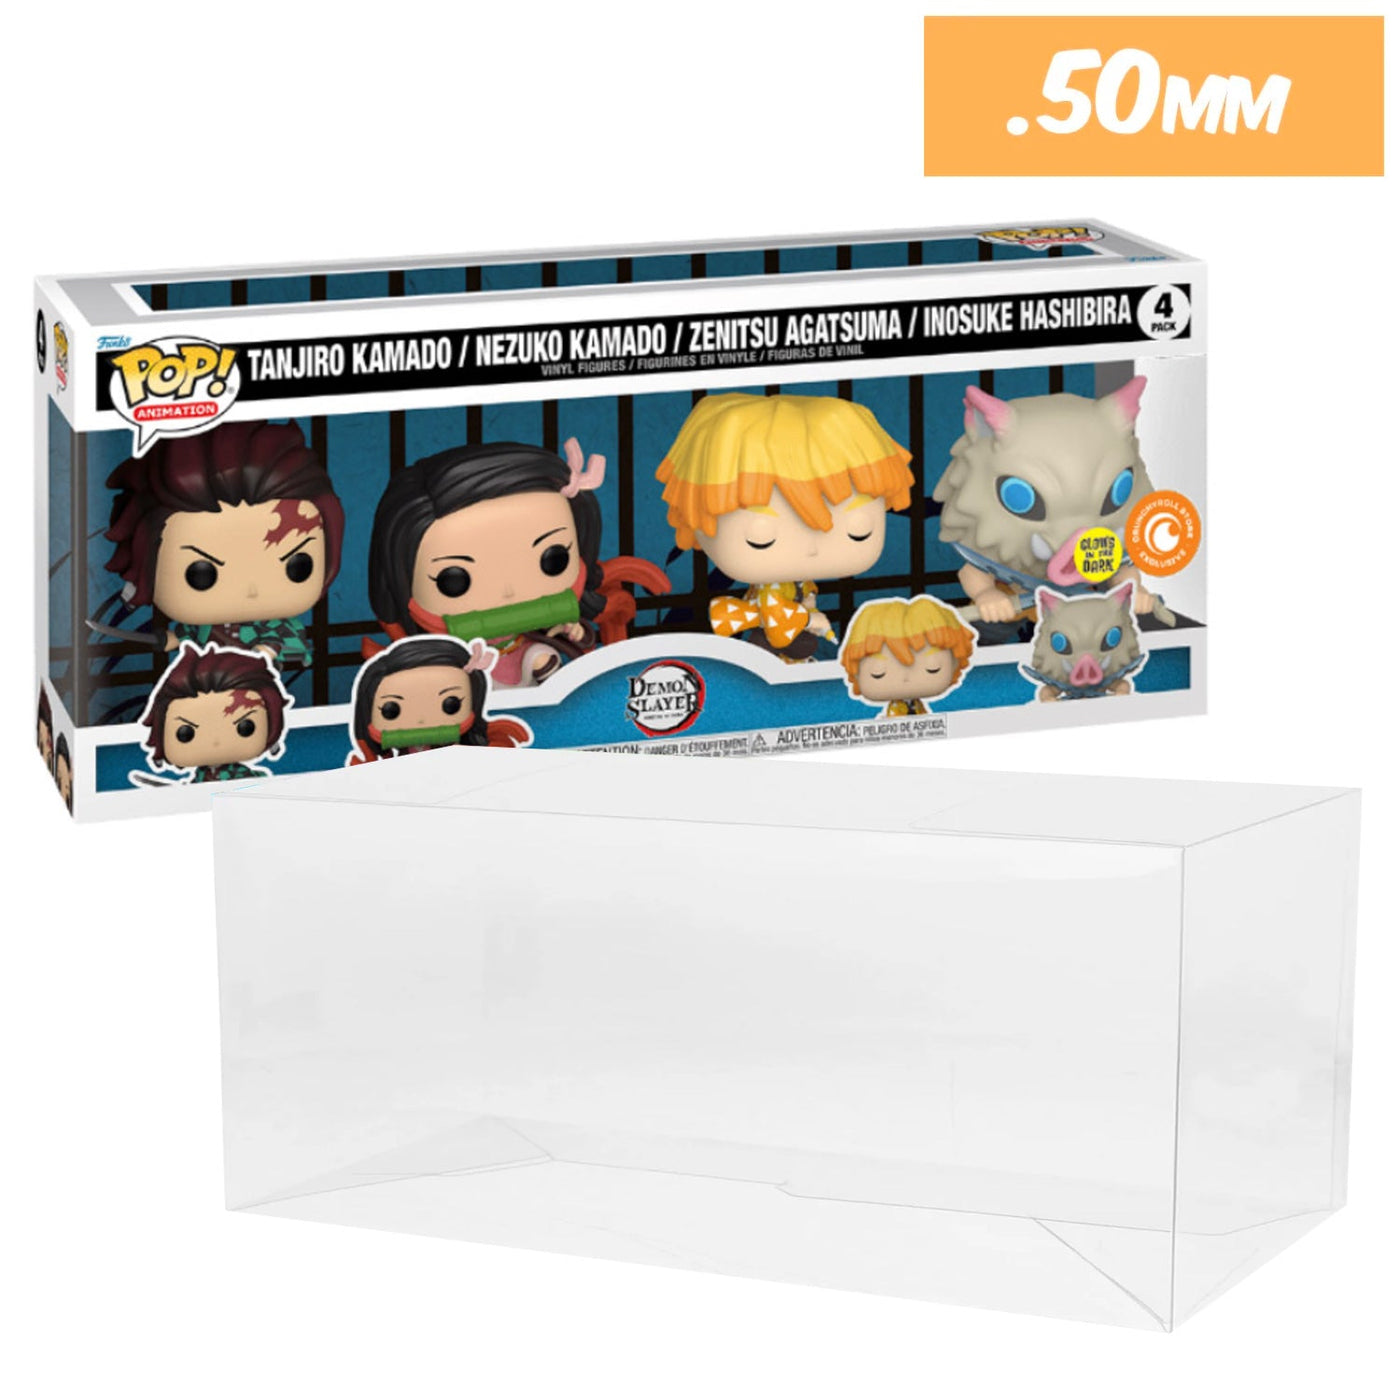 demon slayer 4 pack best funko pop protectors thick strong uv scratch flat top stack vinyl display geek plastic shield vaulted eco armor fits collect protect display case kollector protector